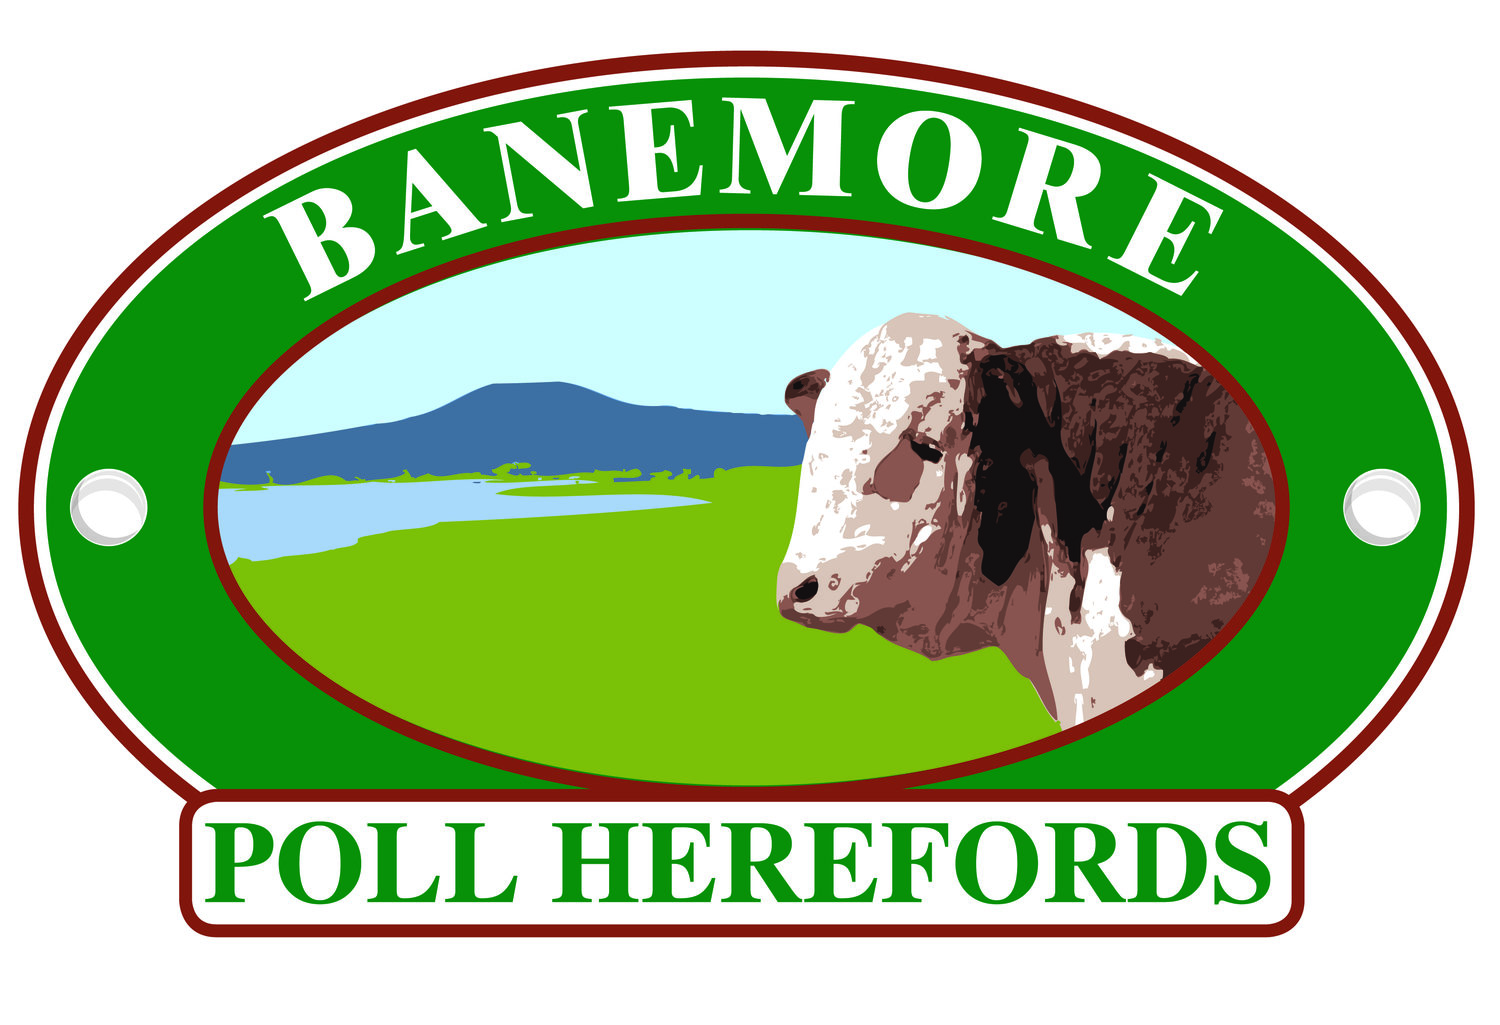 Banemore Herefords